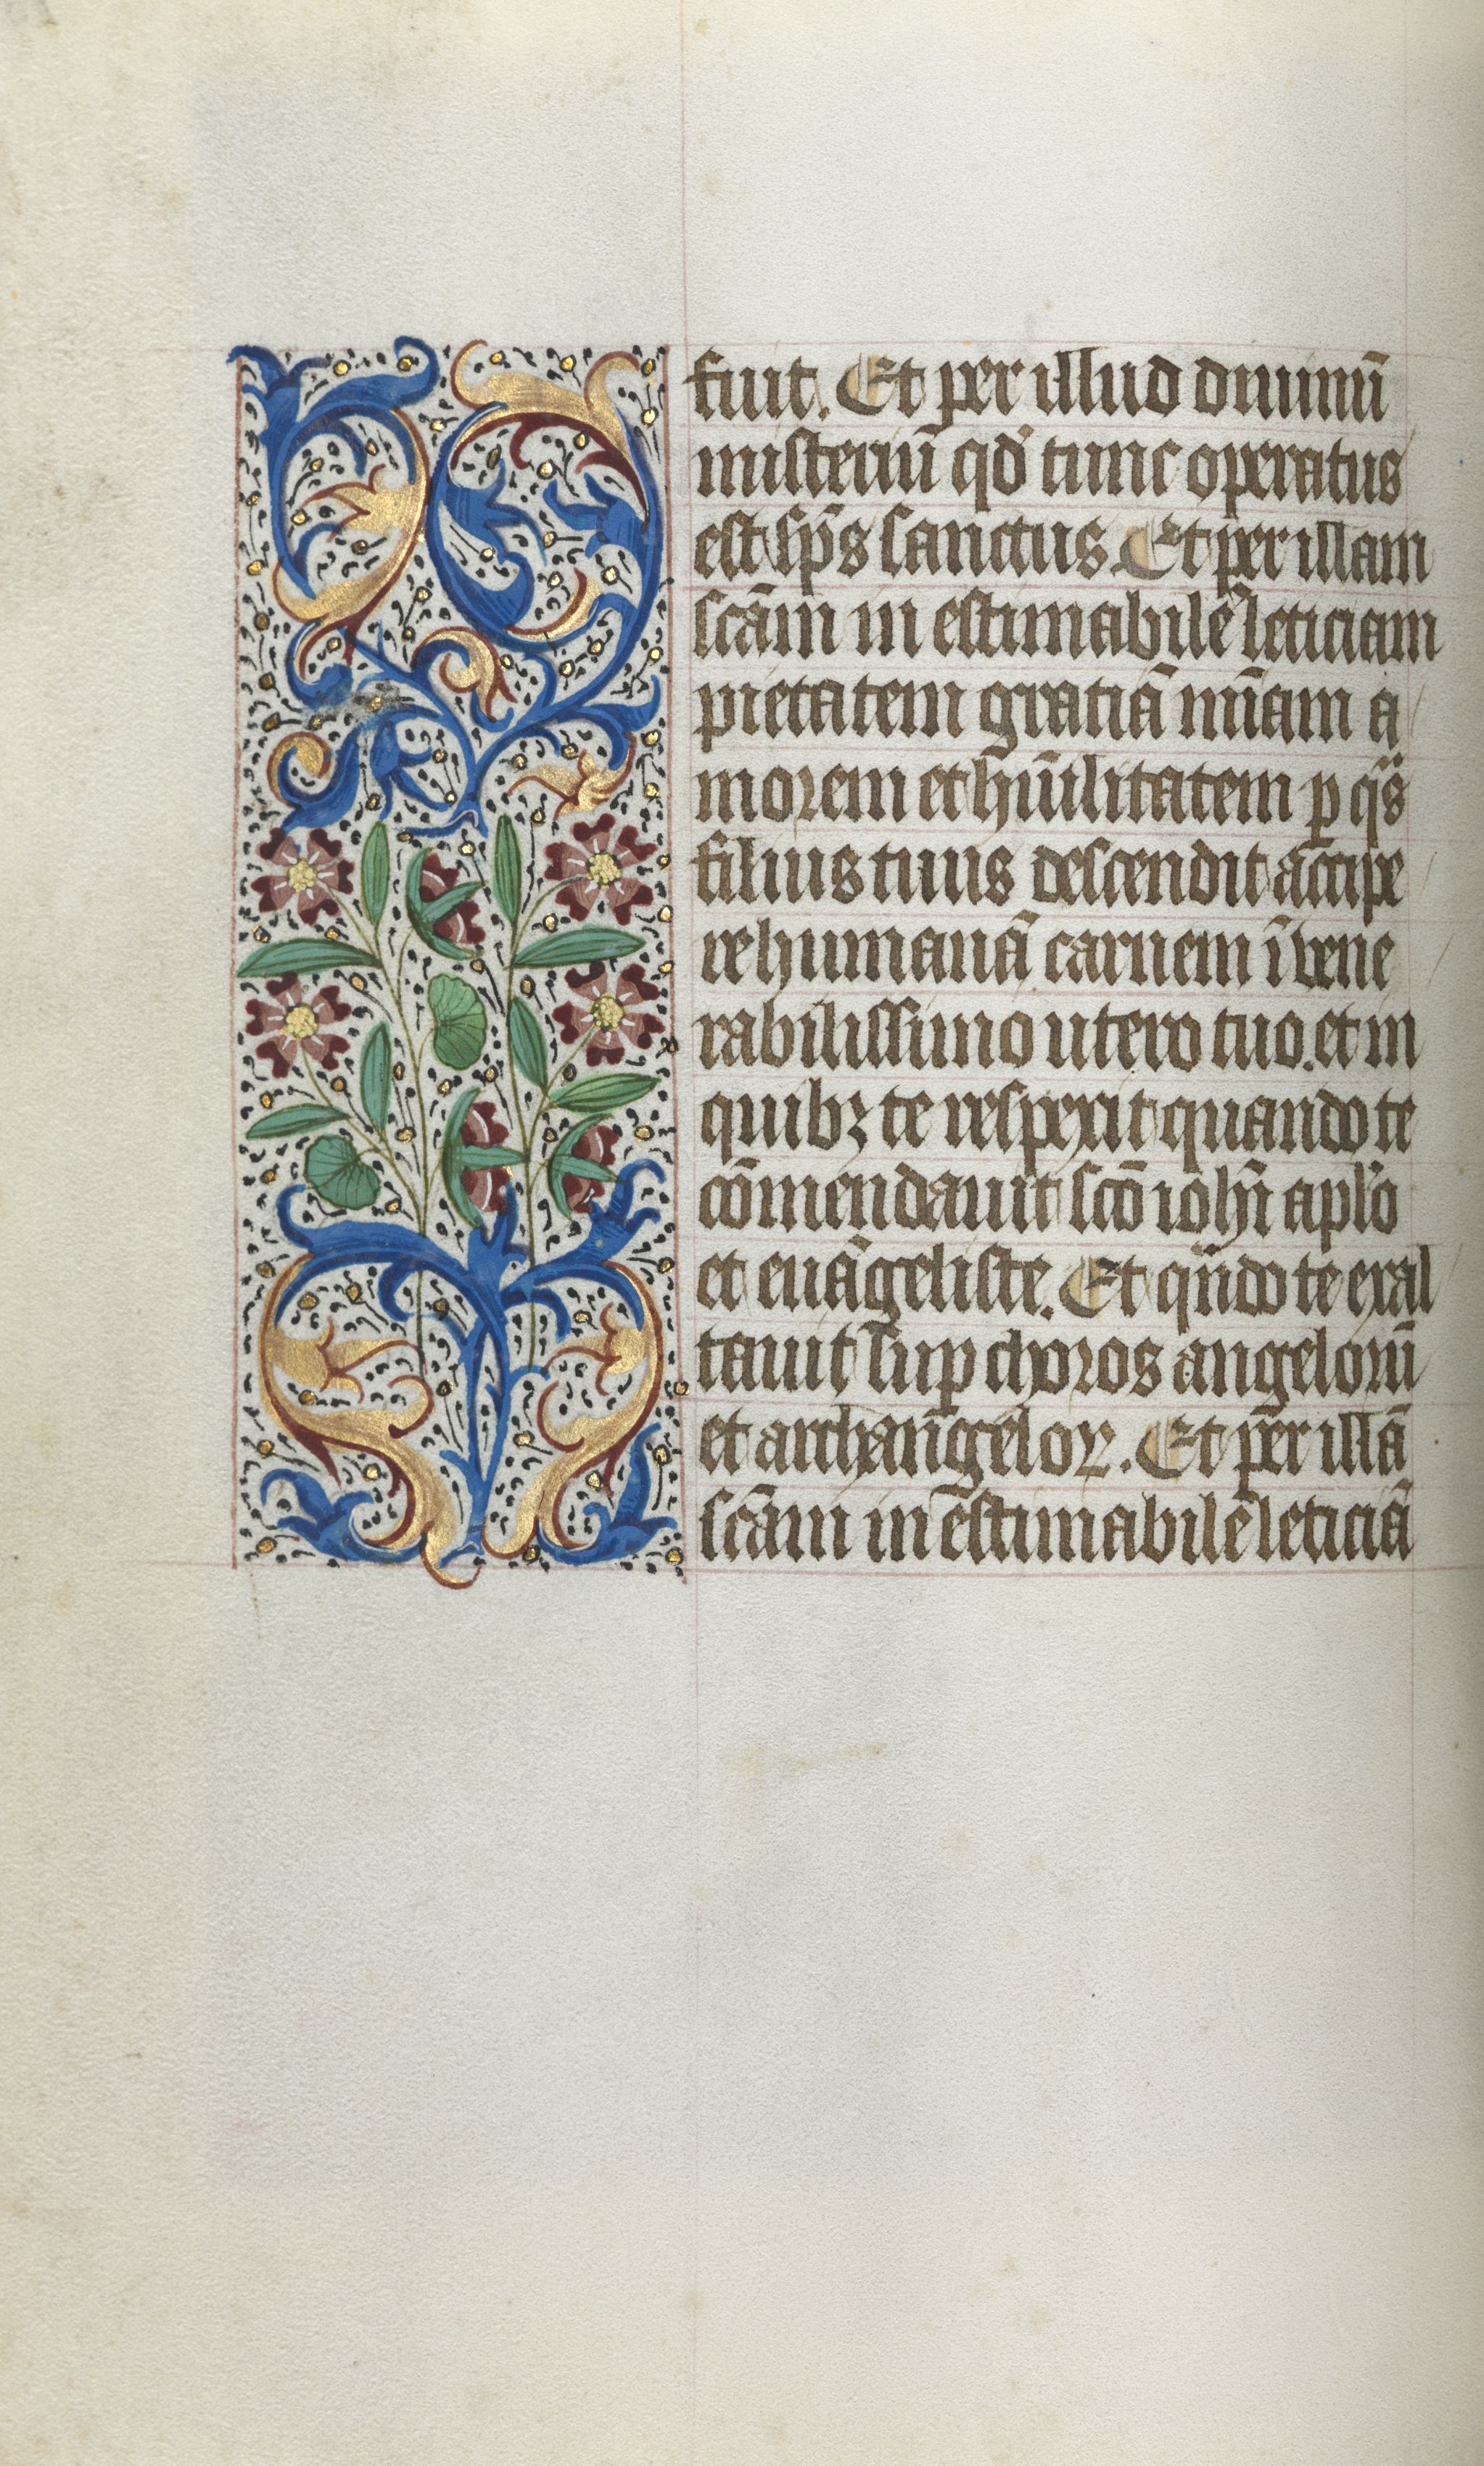 Book of Hours (Use of Rouen): fol. 19v